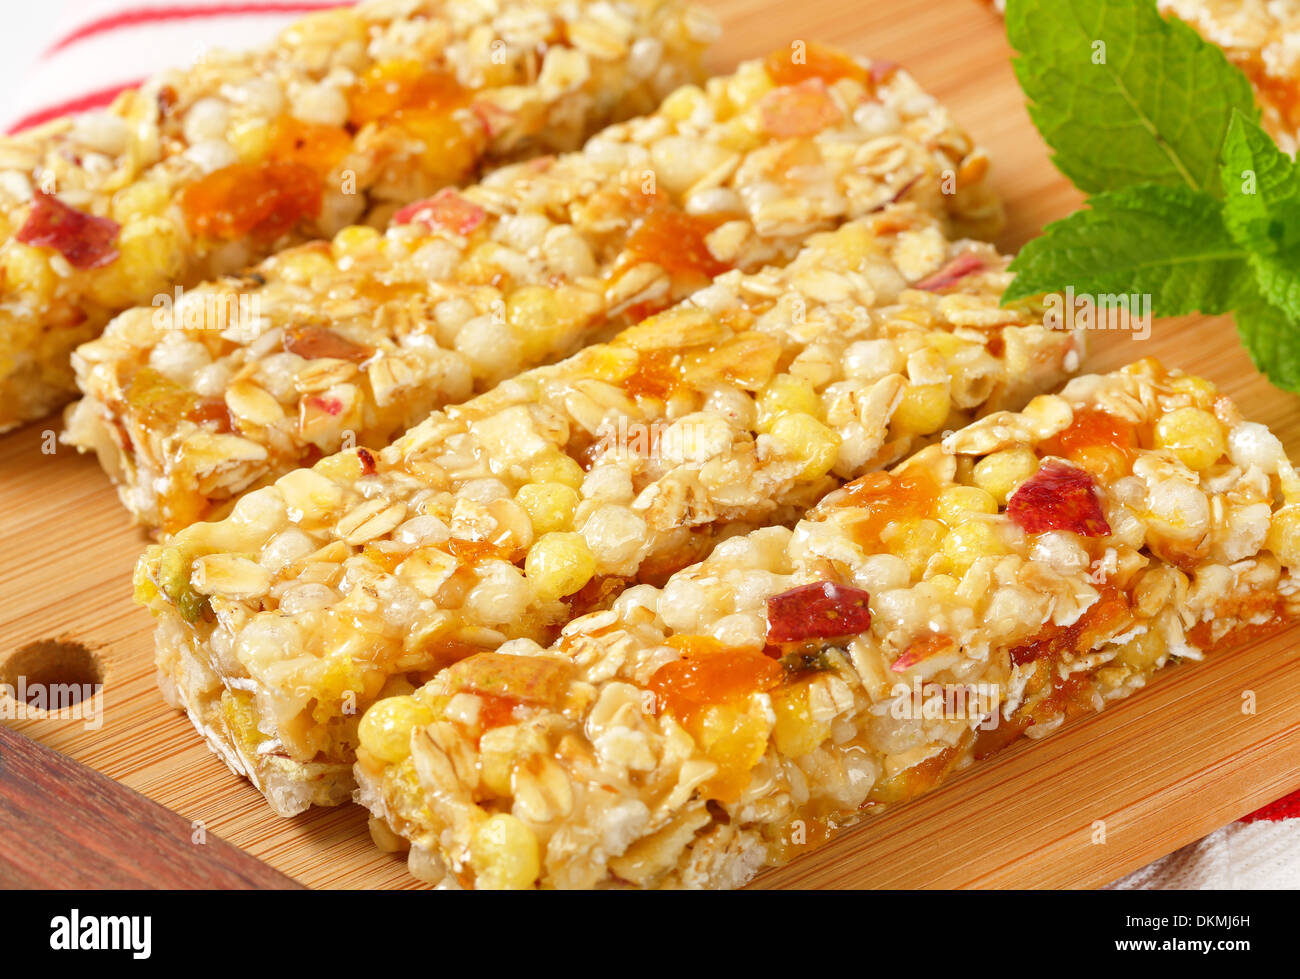 Cereal bars with pieces of dried apricot and apple Stock Photo